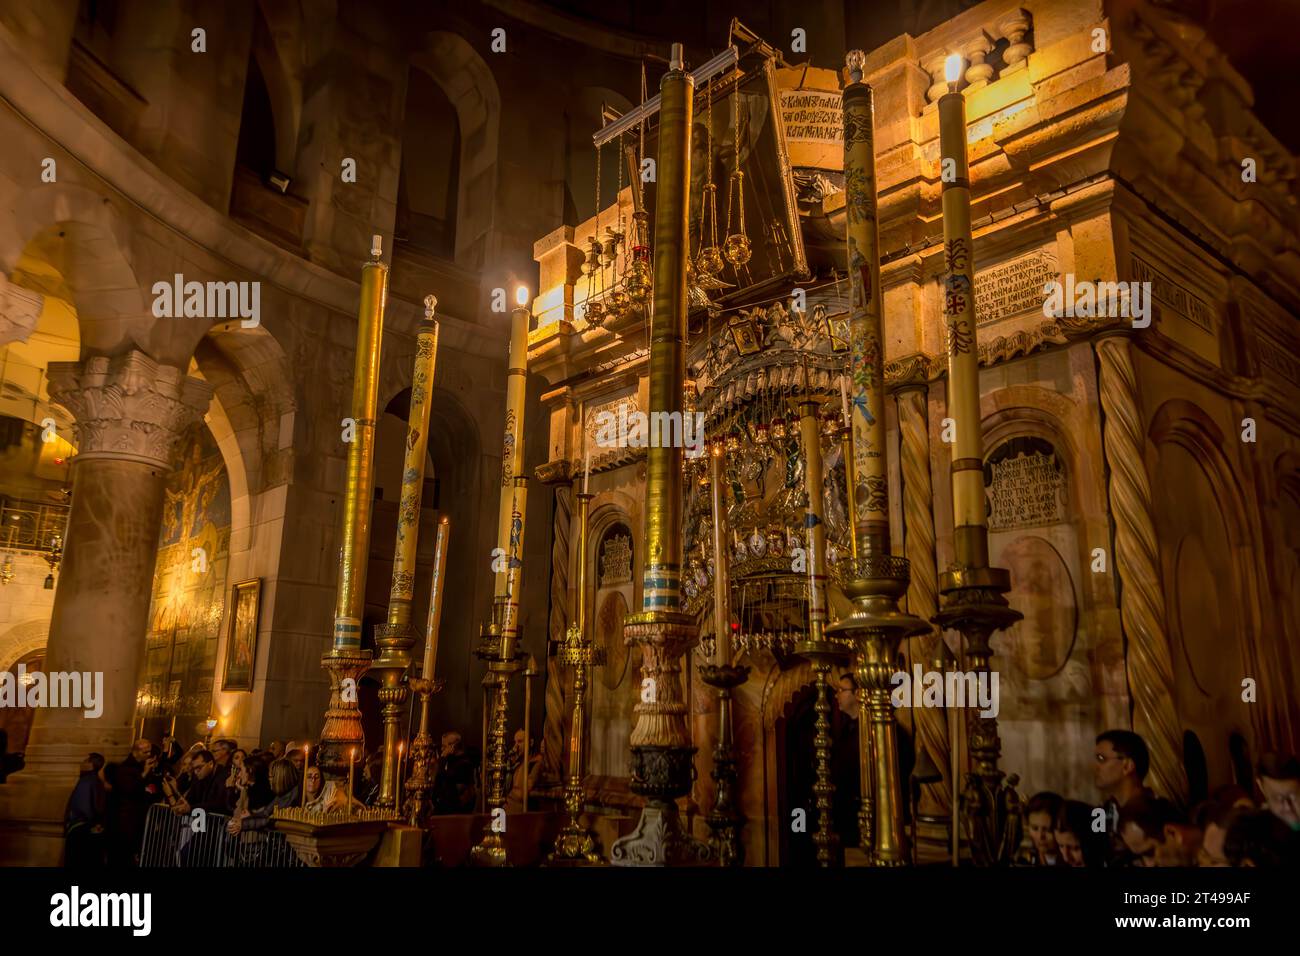 The Aedicule (alleged Jesus Christ's tomb), a Christian shrine, in the Church of the Holy Sepulchre in Old City of Jerusalem, Israel. Stock Photo